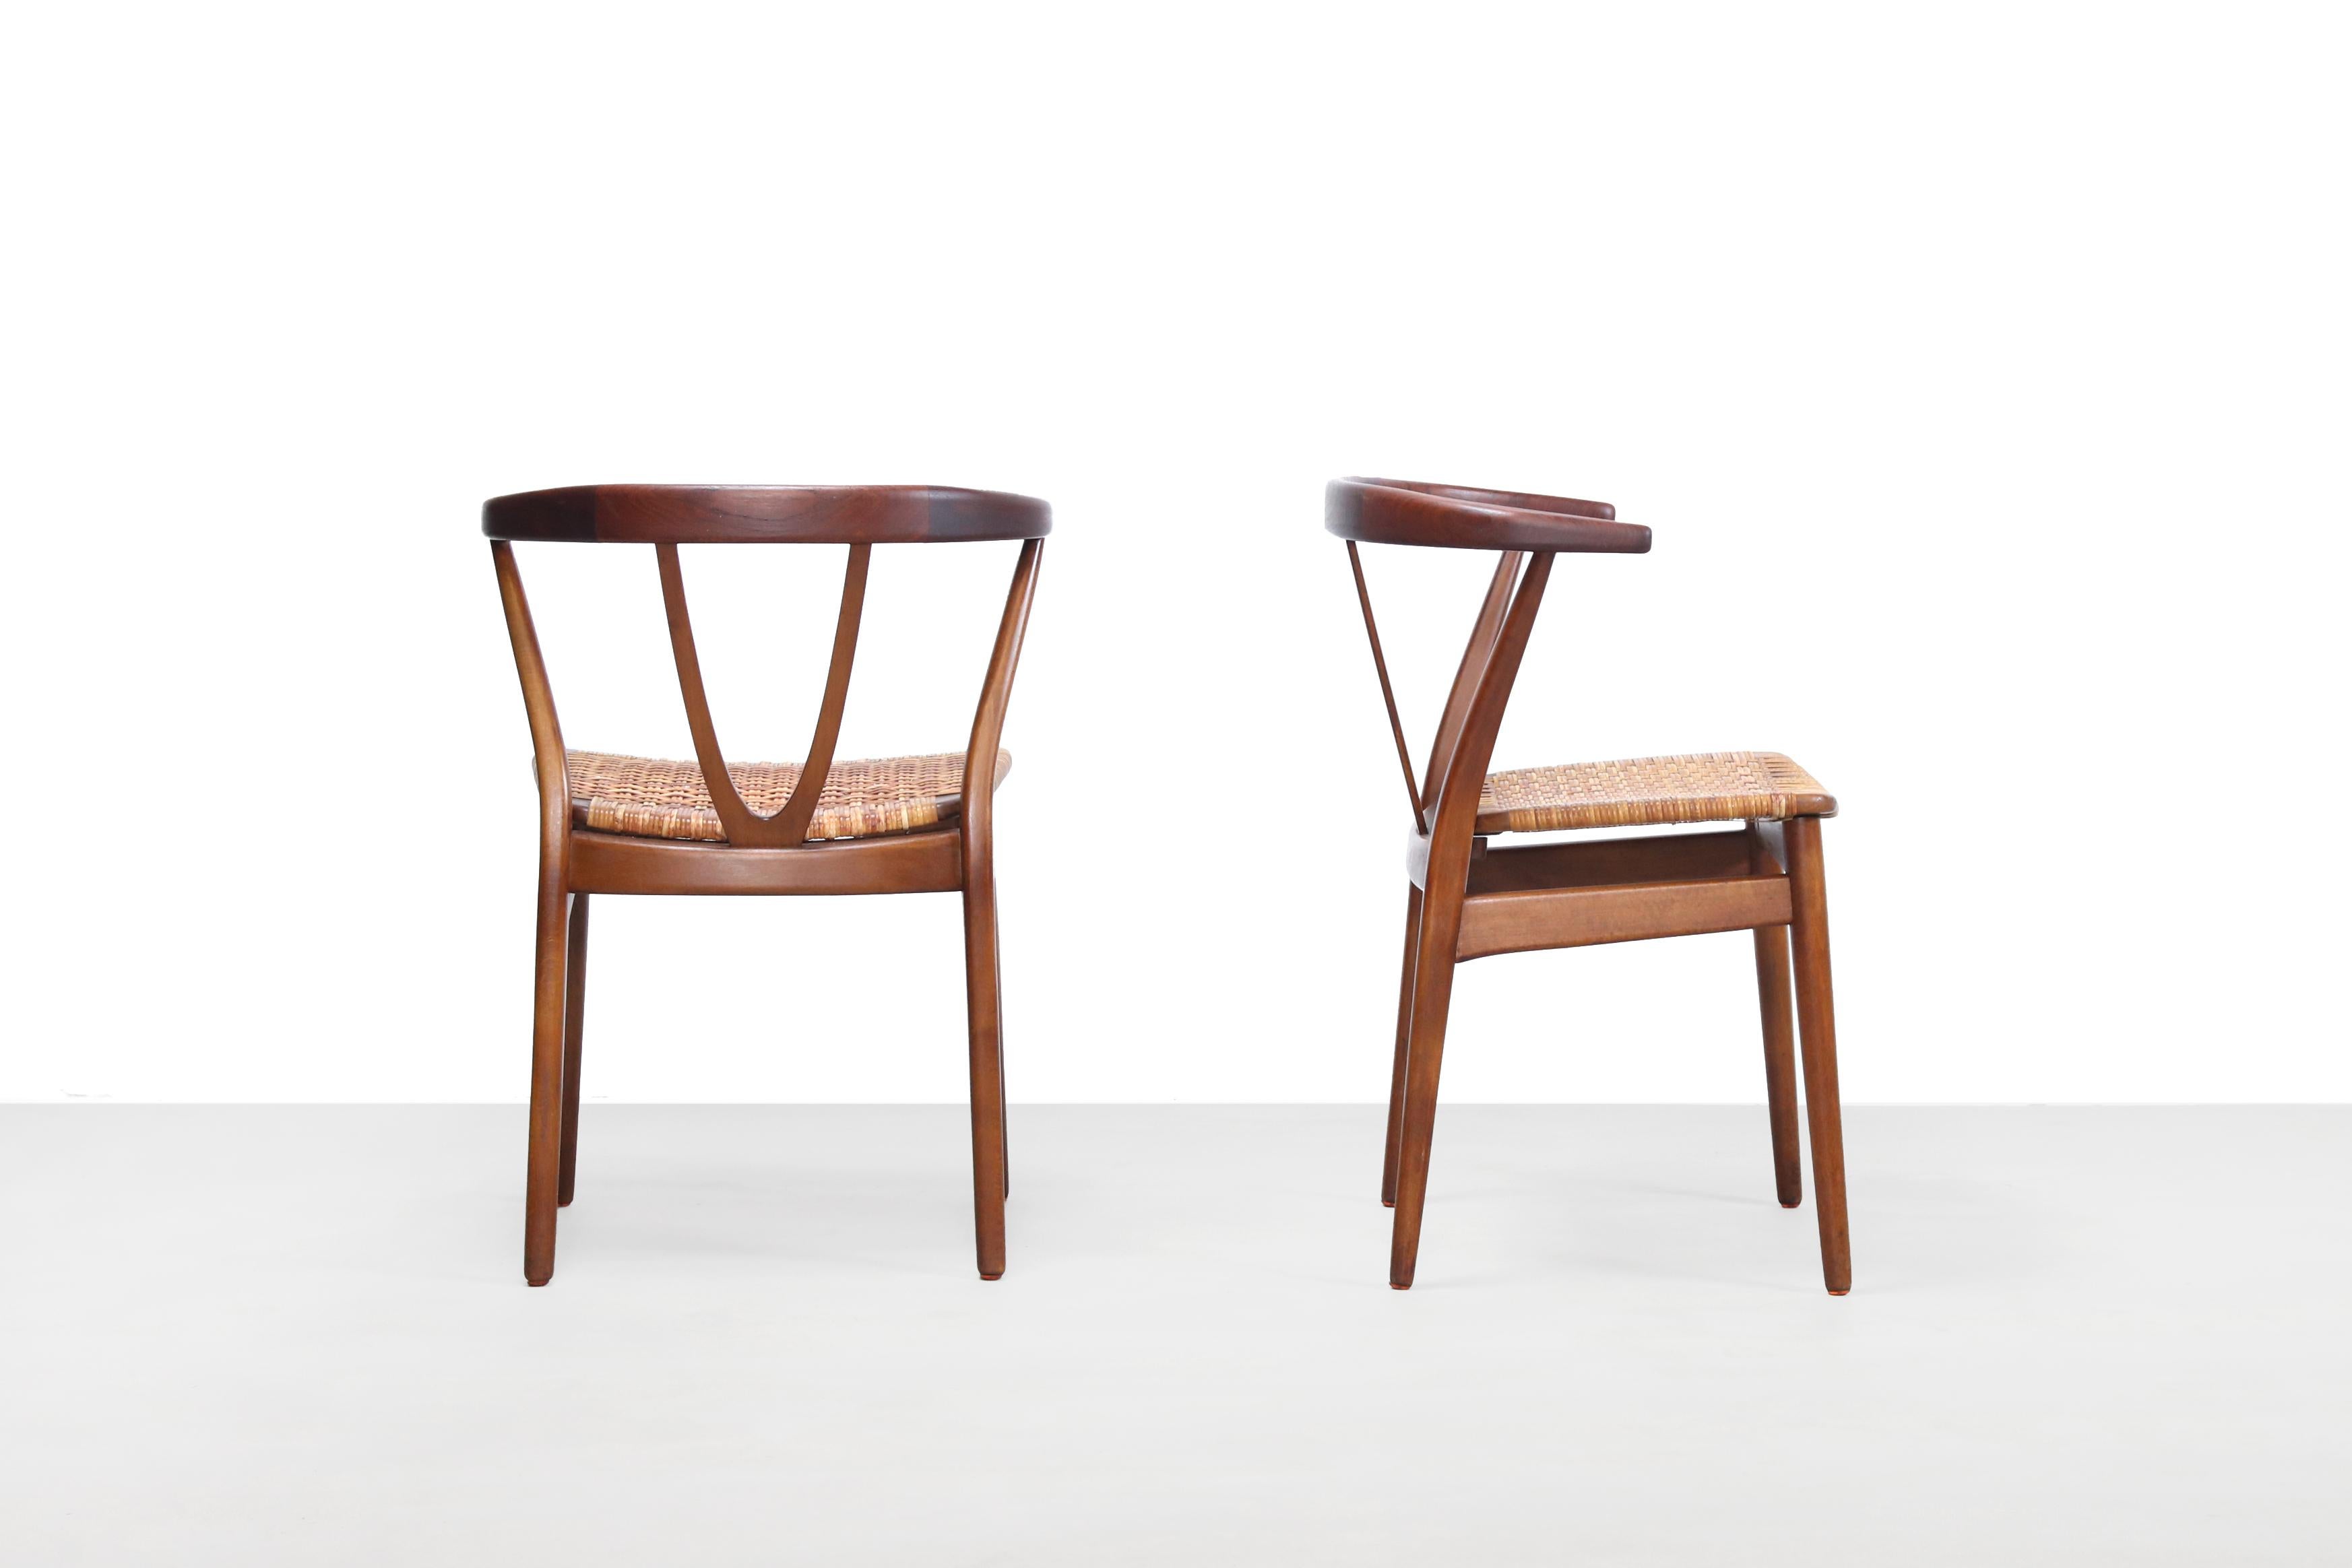 Two rare Scandinavian Modern hoop back chairs designed by Henning Kjaernulf for Bruno Hansen, Denmark in the 1960s. The Kjaernulf model 225 chair has clear references to the Hans Wegner wishbone chair. These chairs are made of solid teak with a